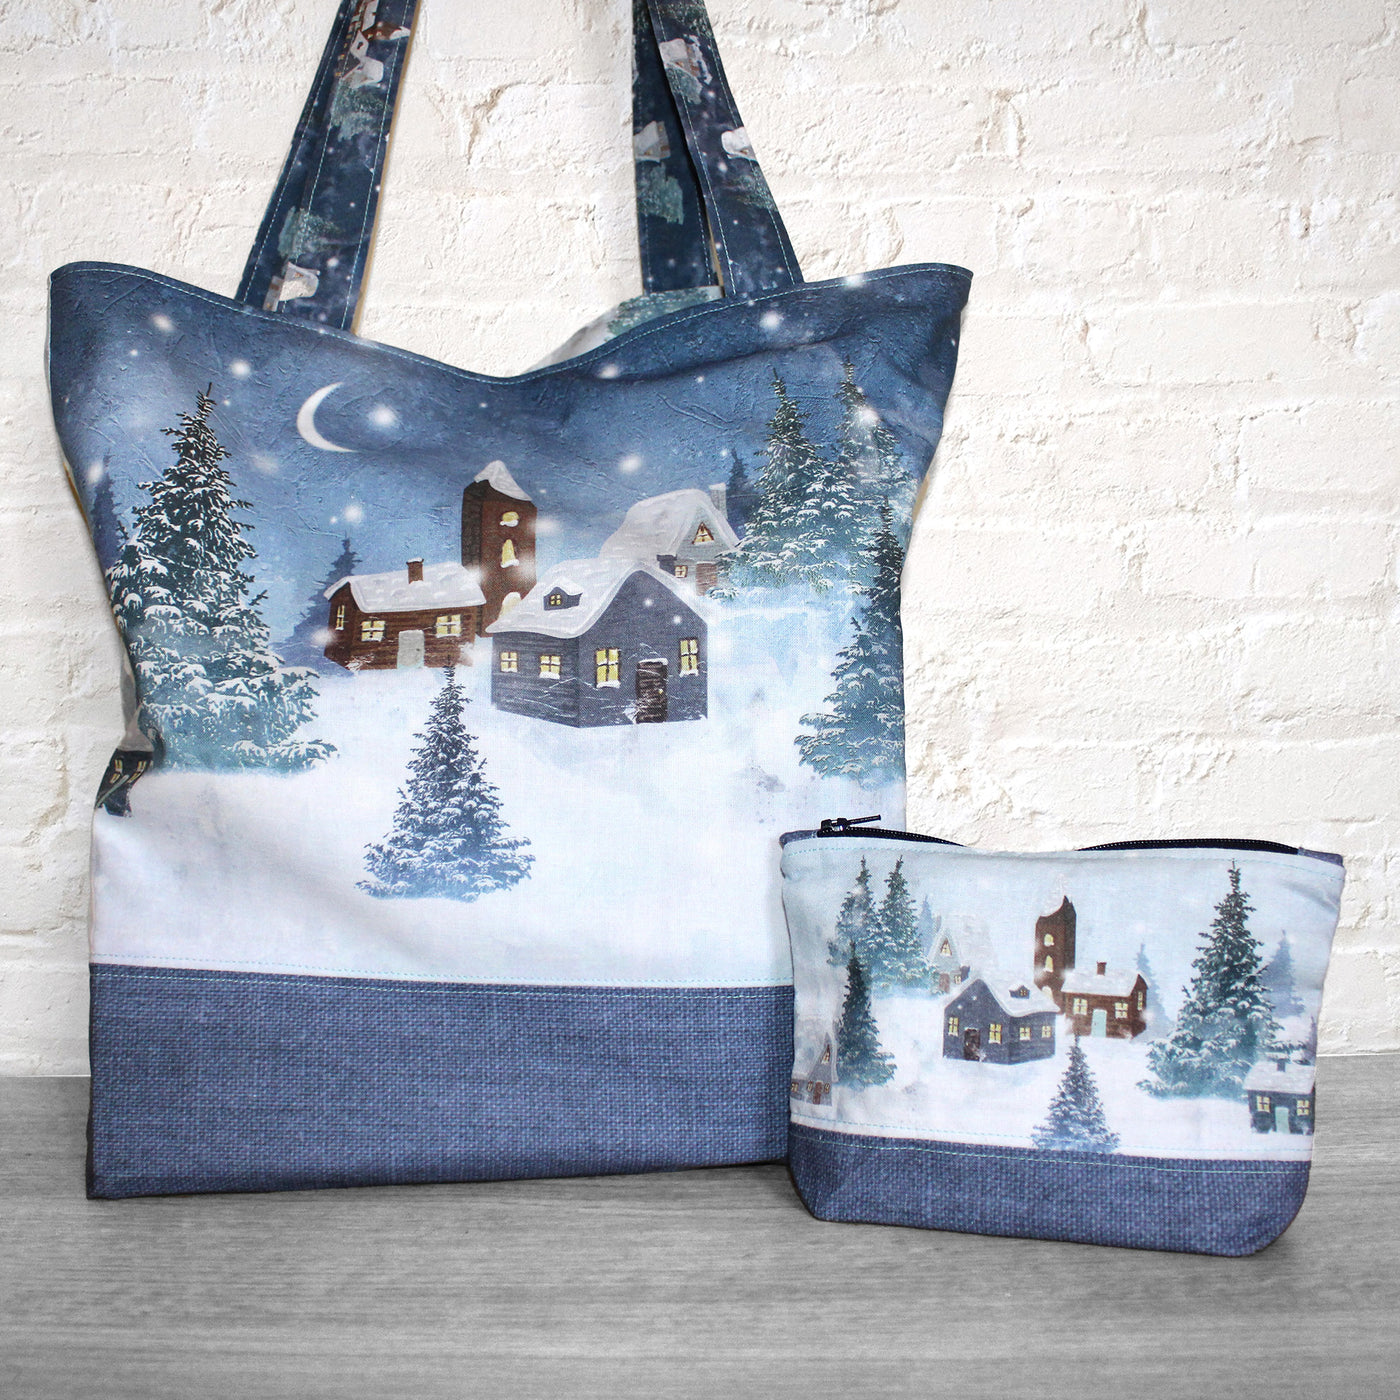 The Totally Tote - Winter Kit